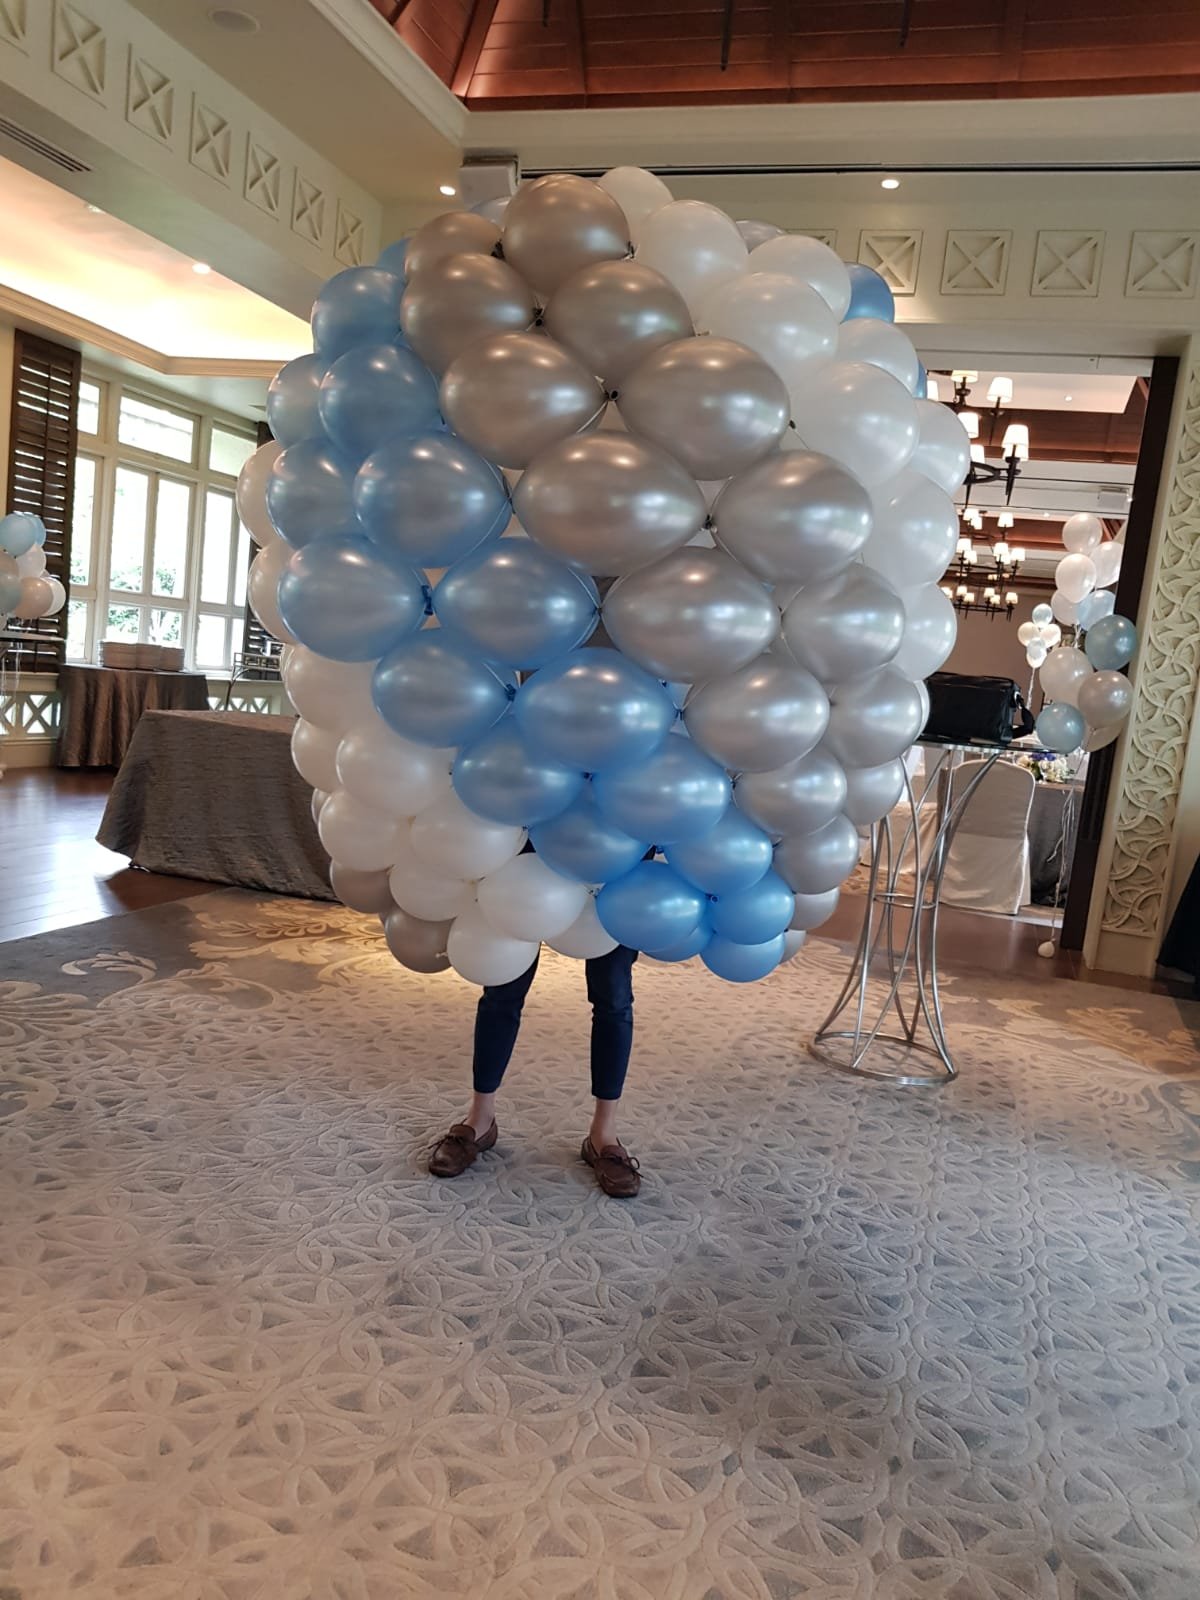 , Large Hot Air Balloon Sculpture Display For Phototaking, Singapore Balloon Decoration Services - Balloon Workshop and Balloon Sculpting